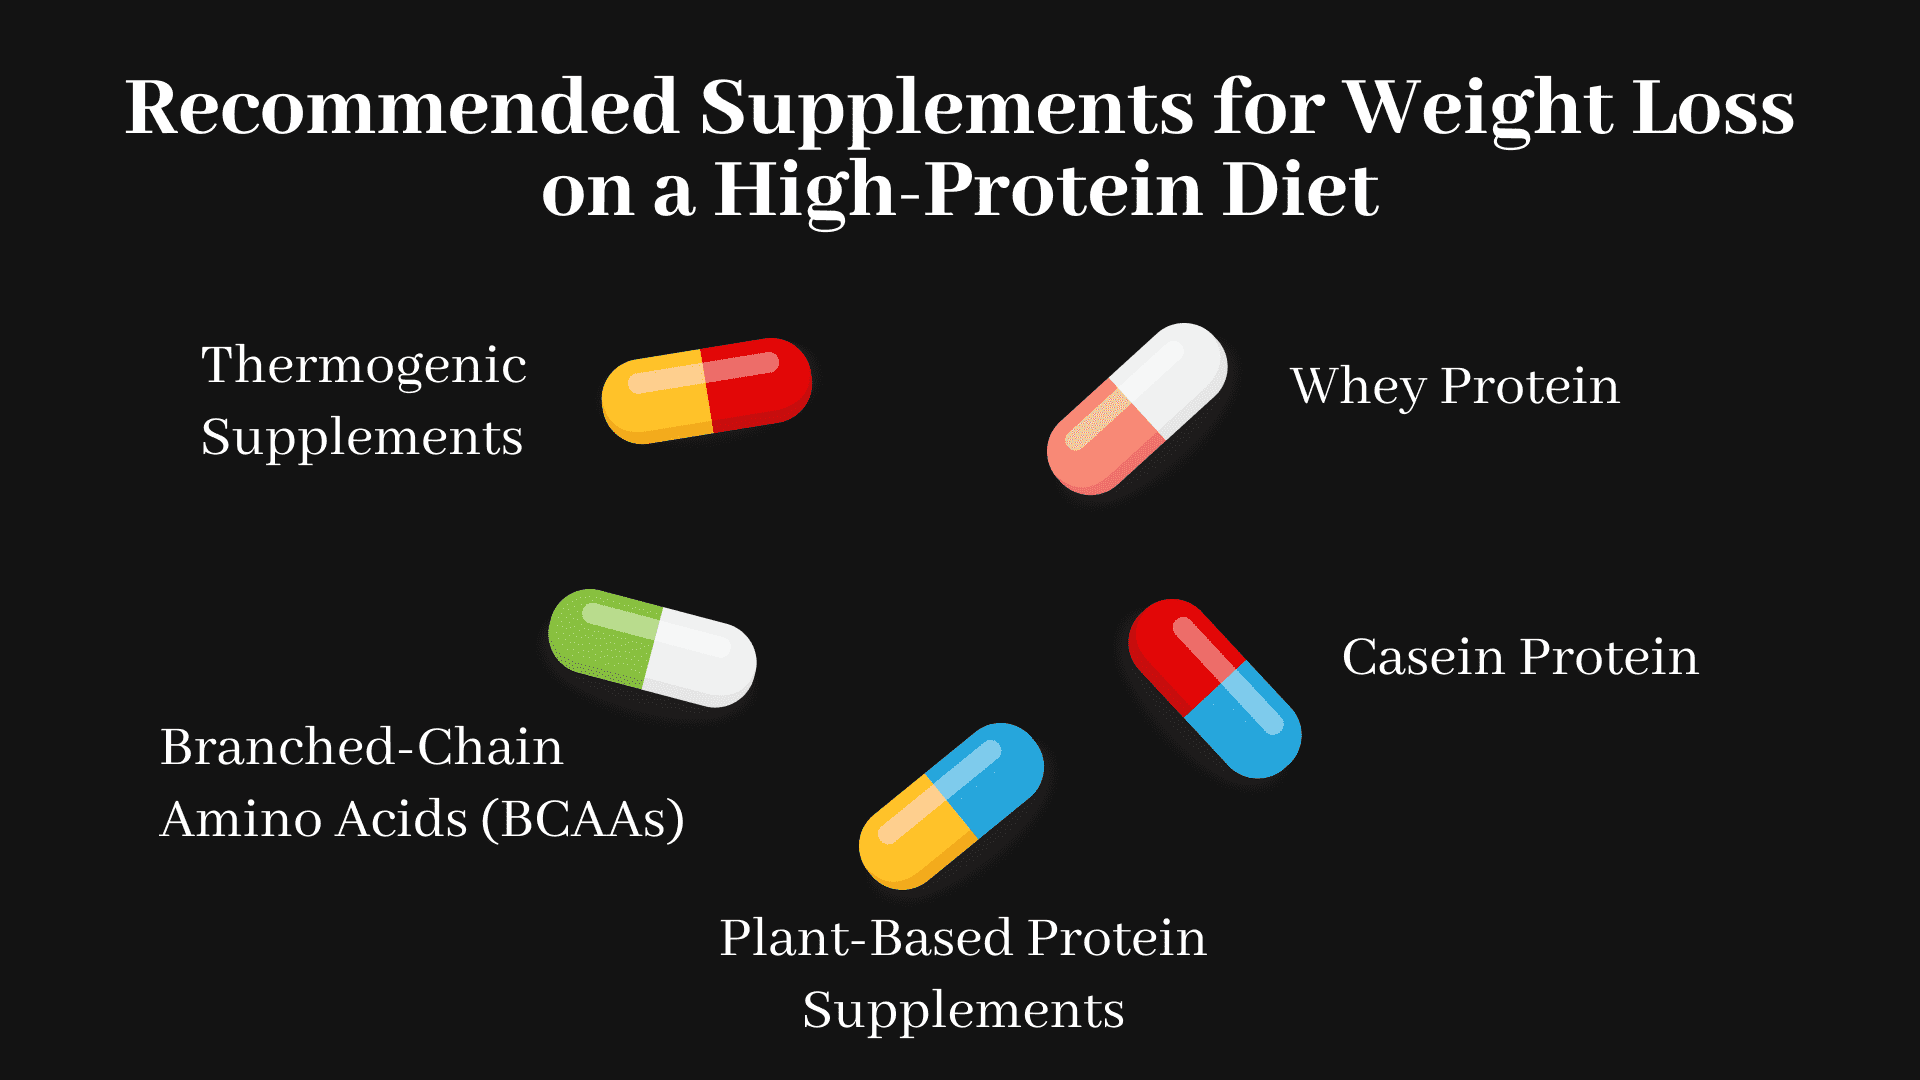 Recommended Supplements for Weight Loss on a High-Protein Diet